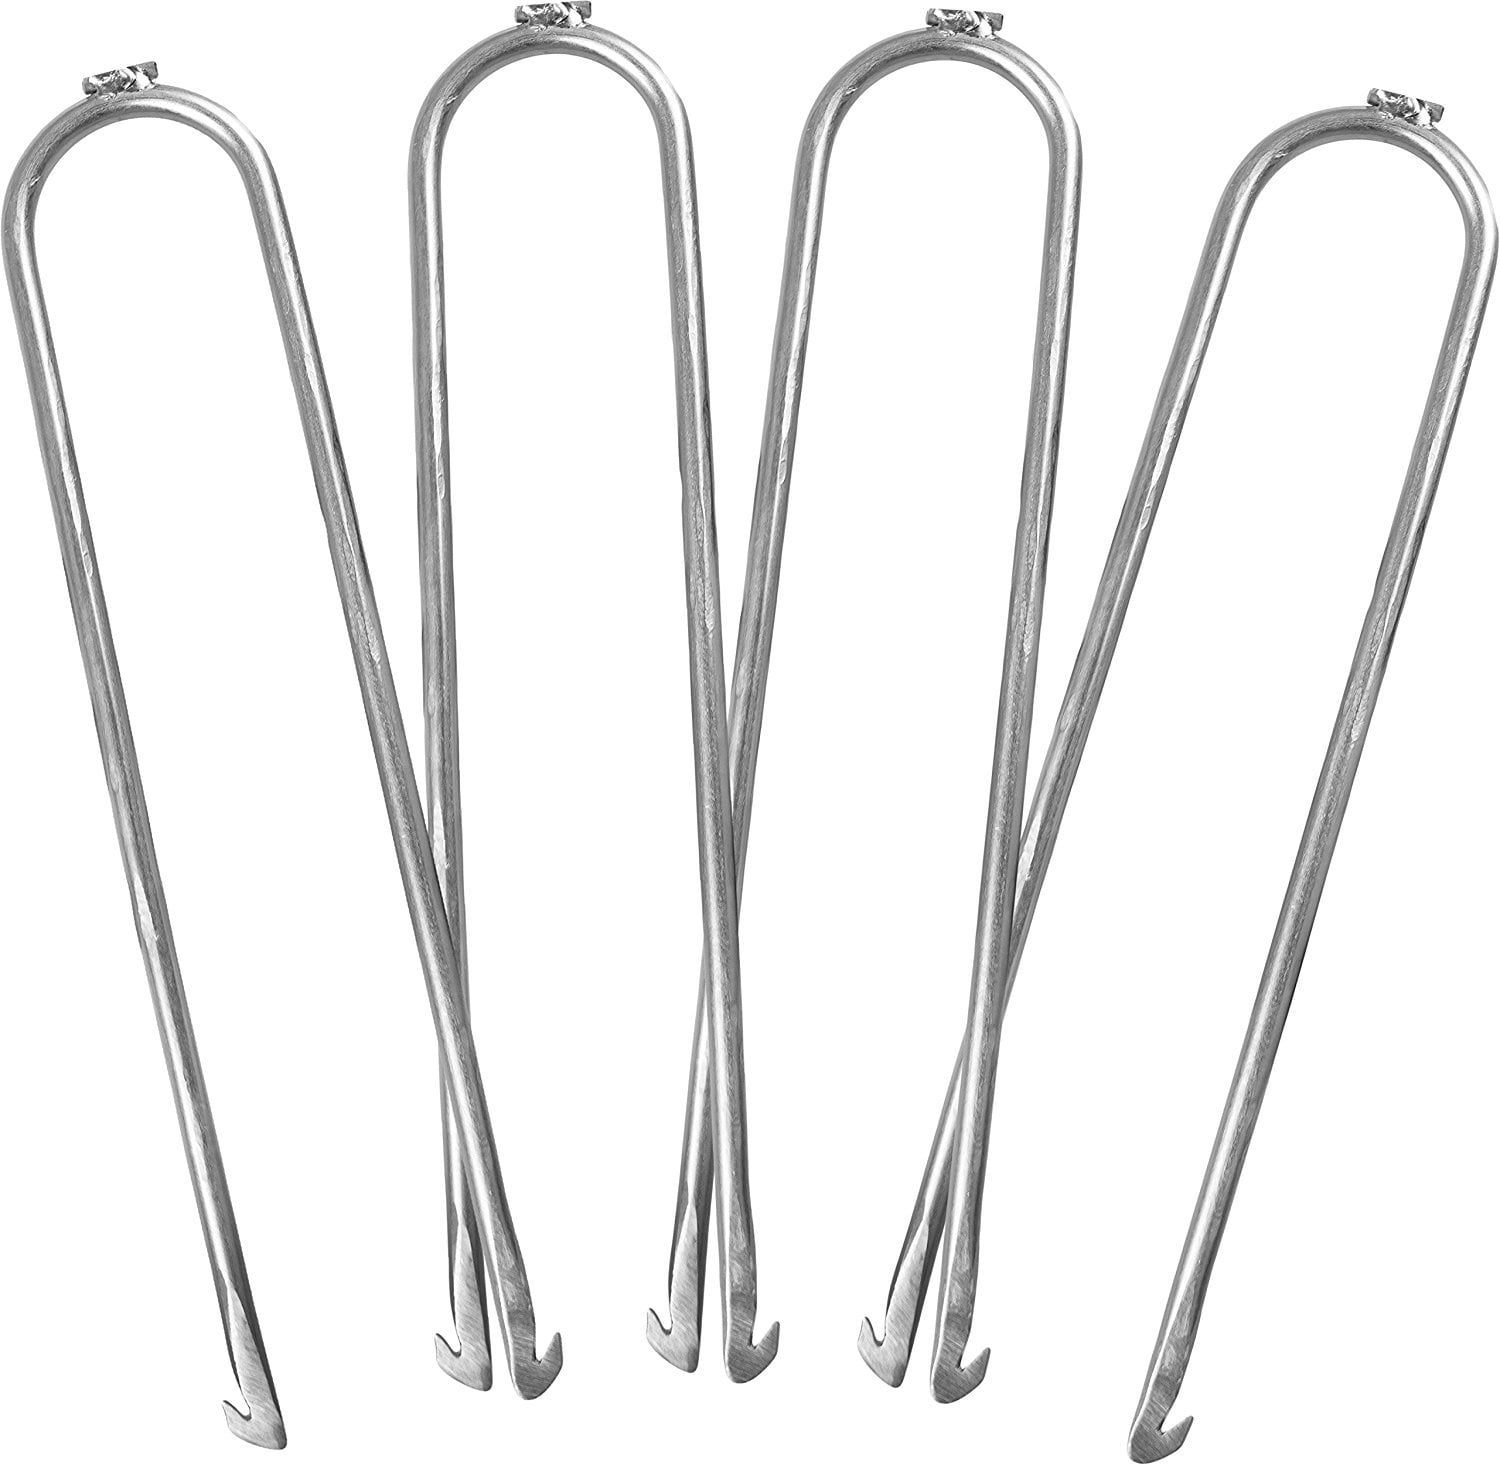 14 Inch Heavy Duty Trampoline Stakes Anchors High Wind Galvanized Steel Metal Pegs Soccer Goals Marquee Extra Long U Shaped Tent Stakes Swing Set and Garden Furniture VISENSE Tents 6 Pack